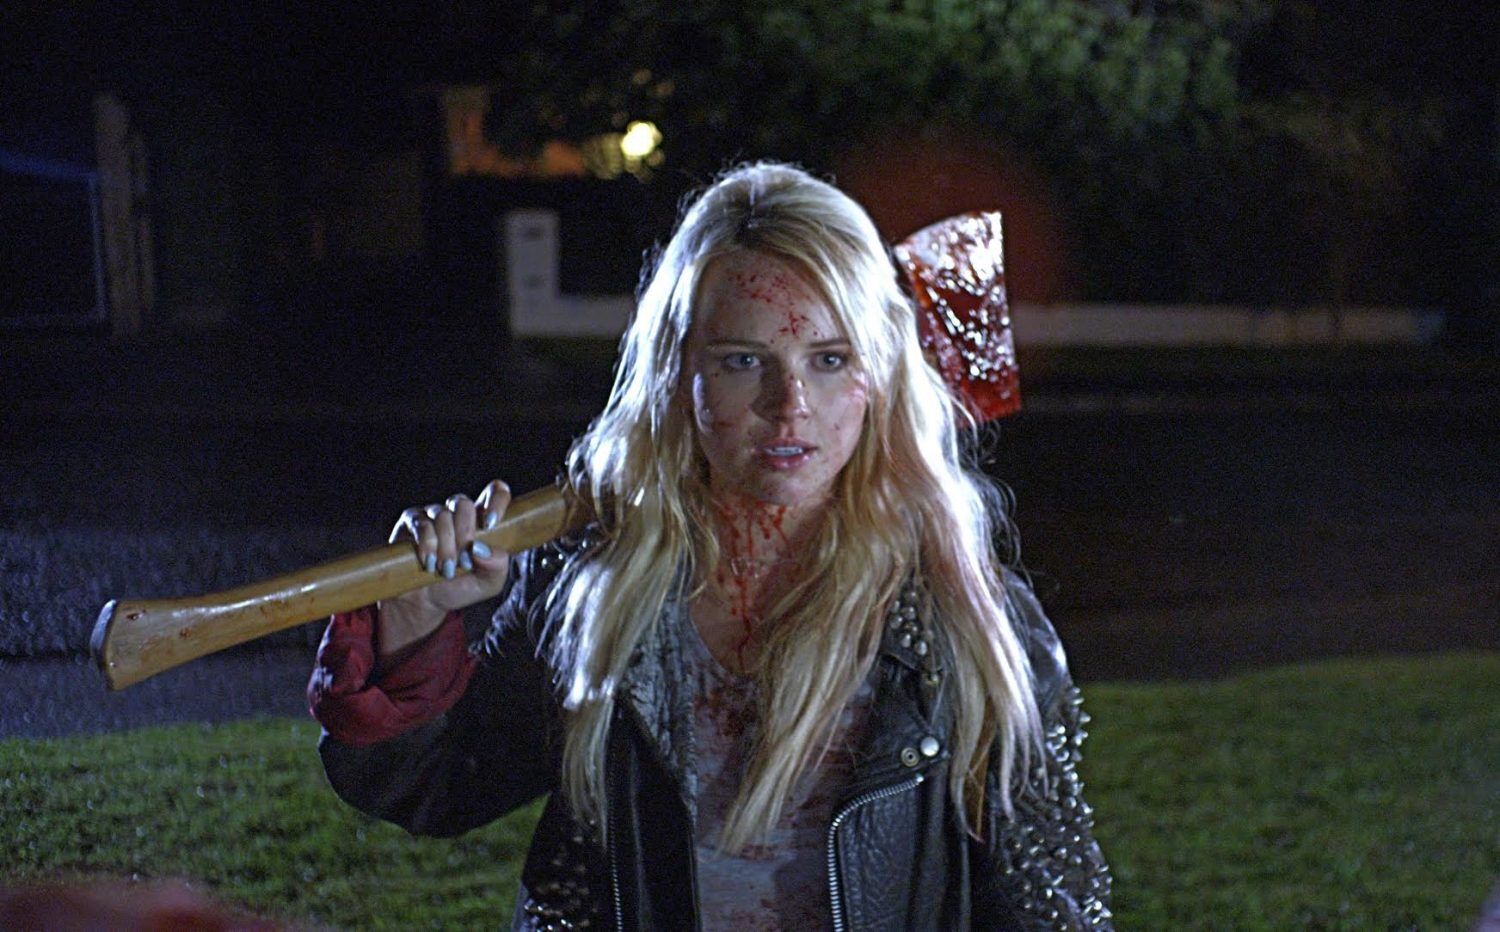 Gender and the Final Girl